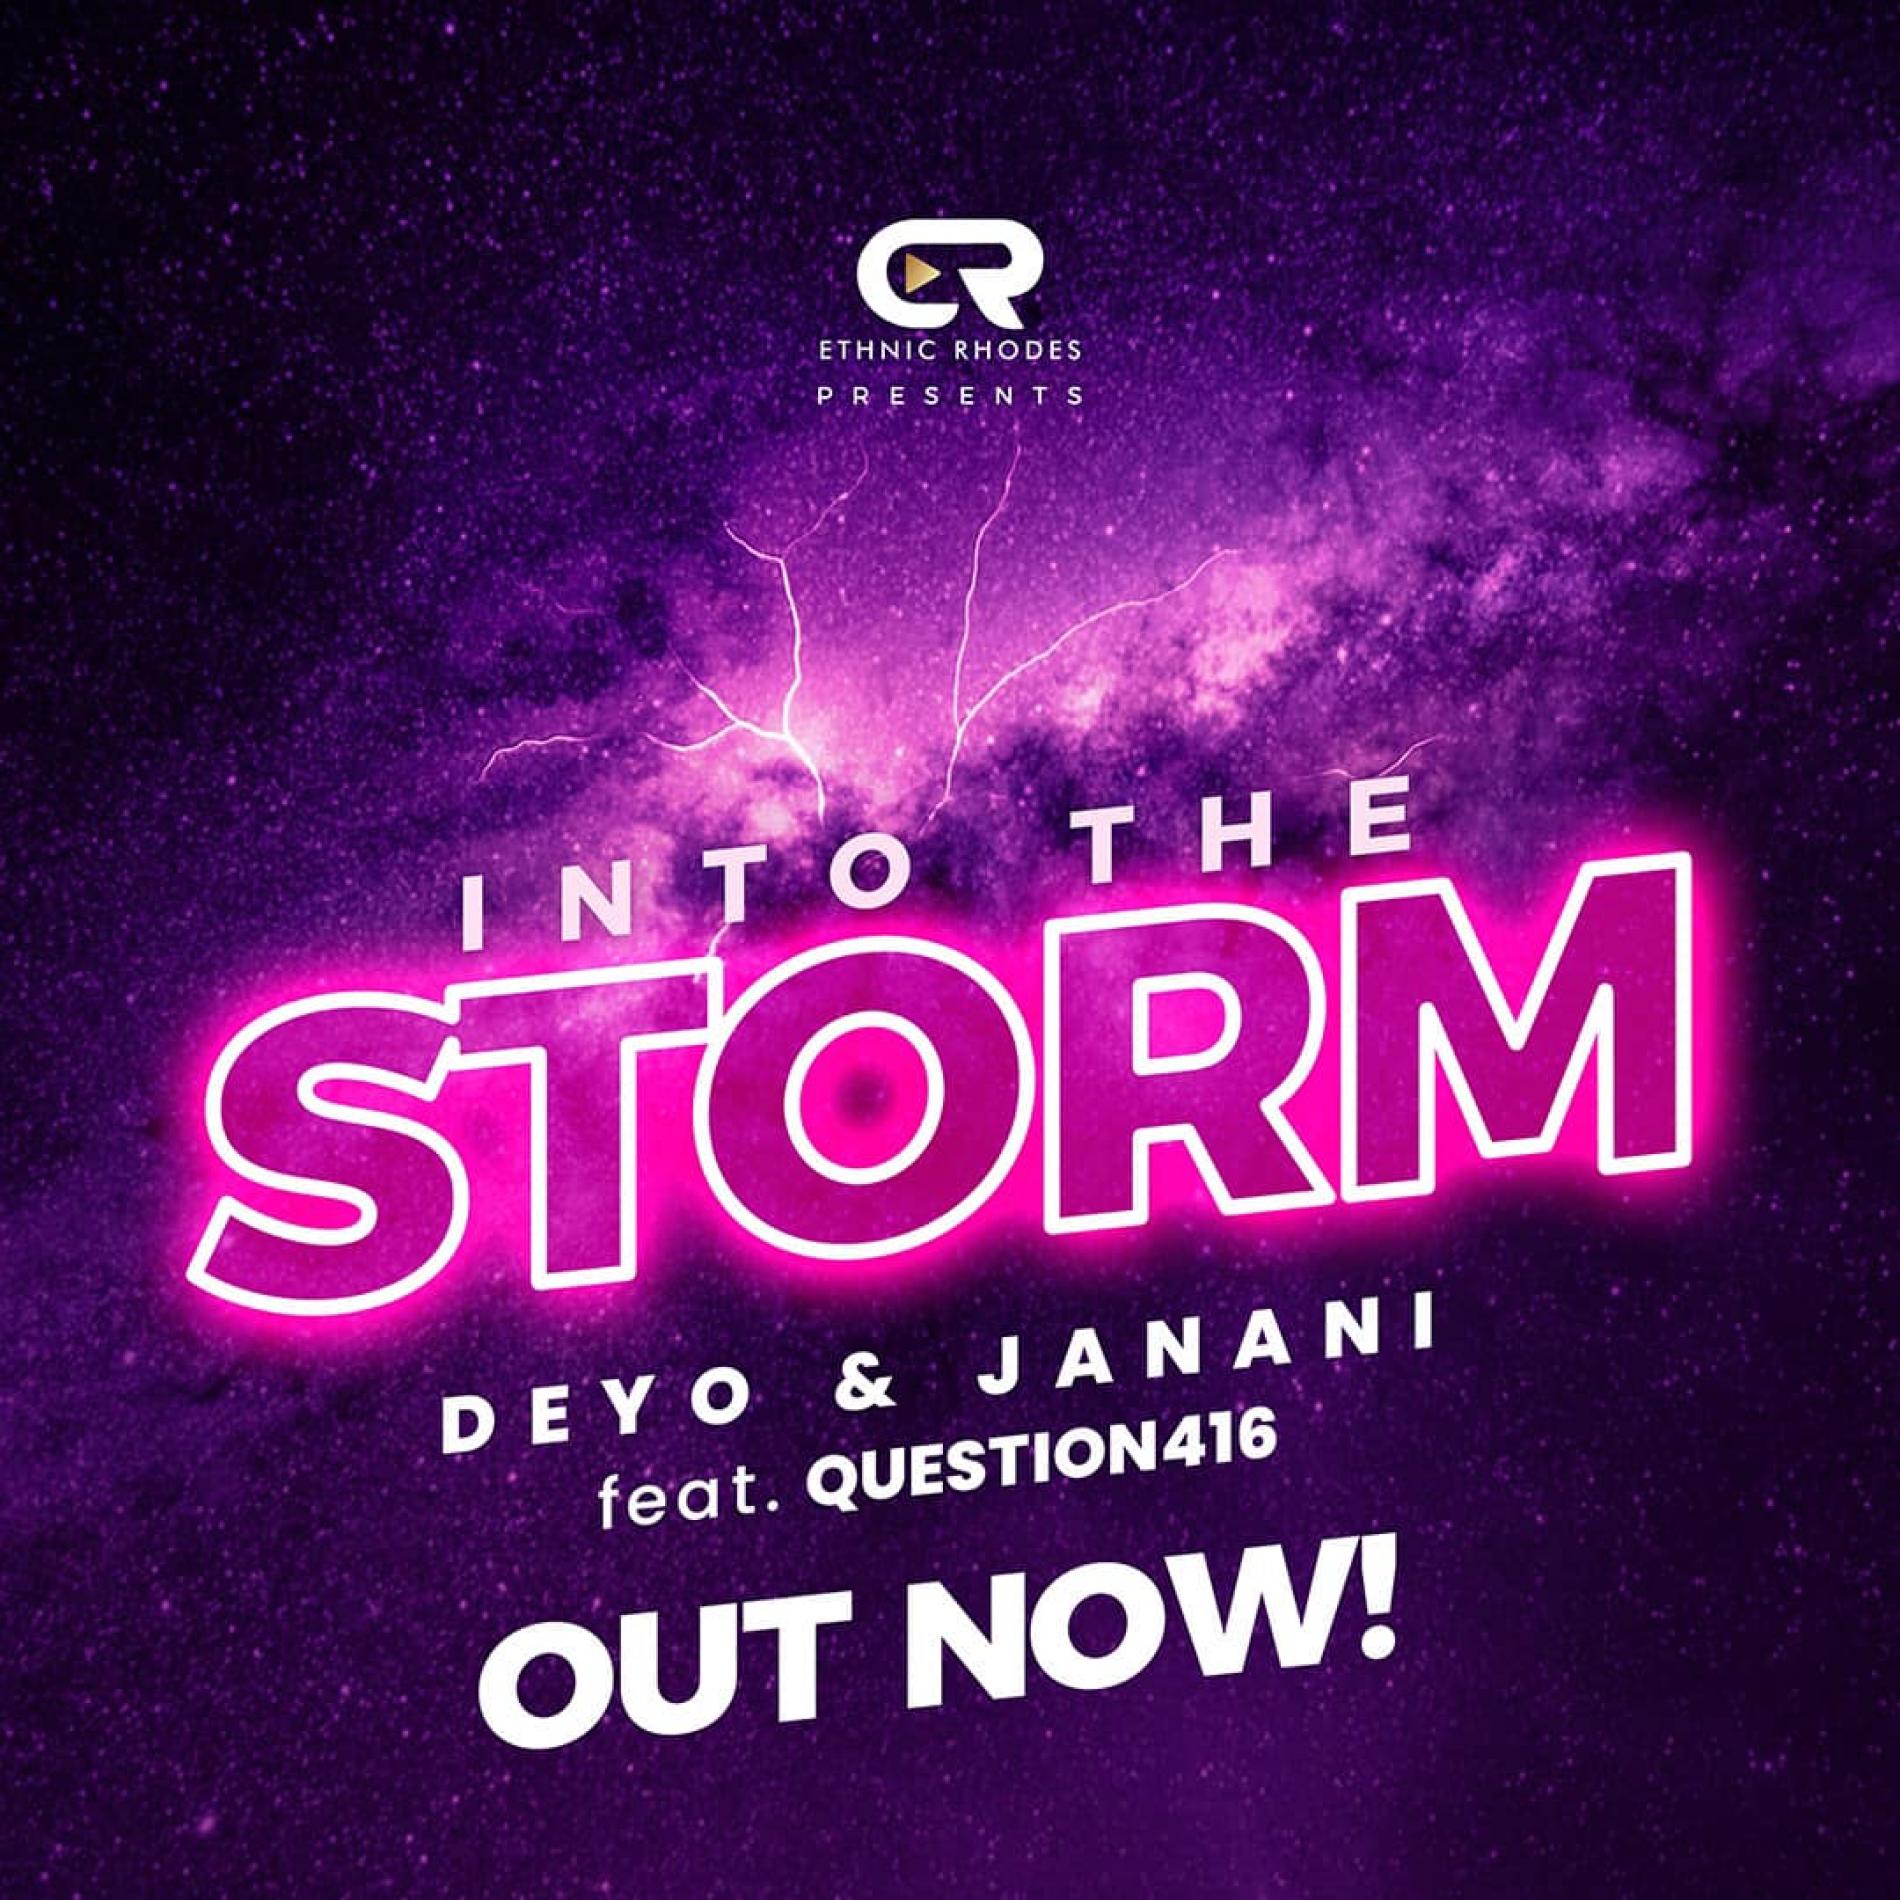 New Music : Deyo & Janani Ft Questions416 – Into The Storm